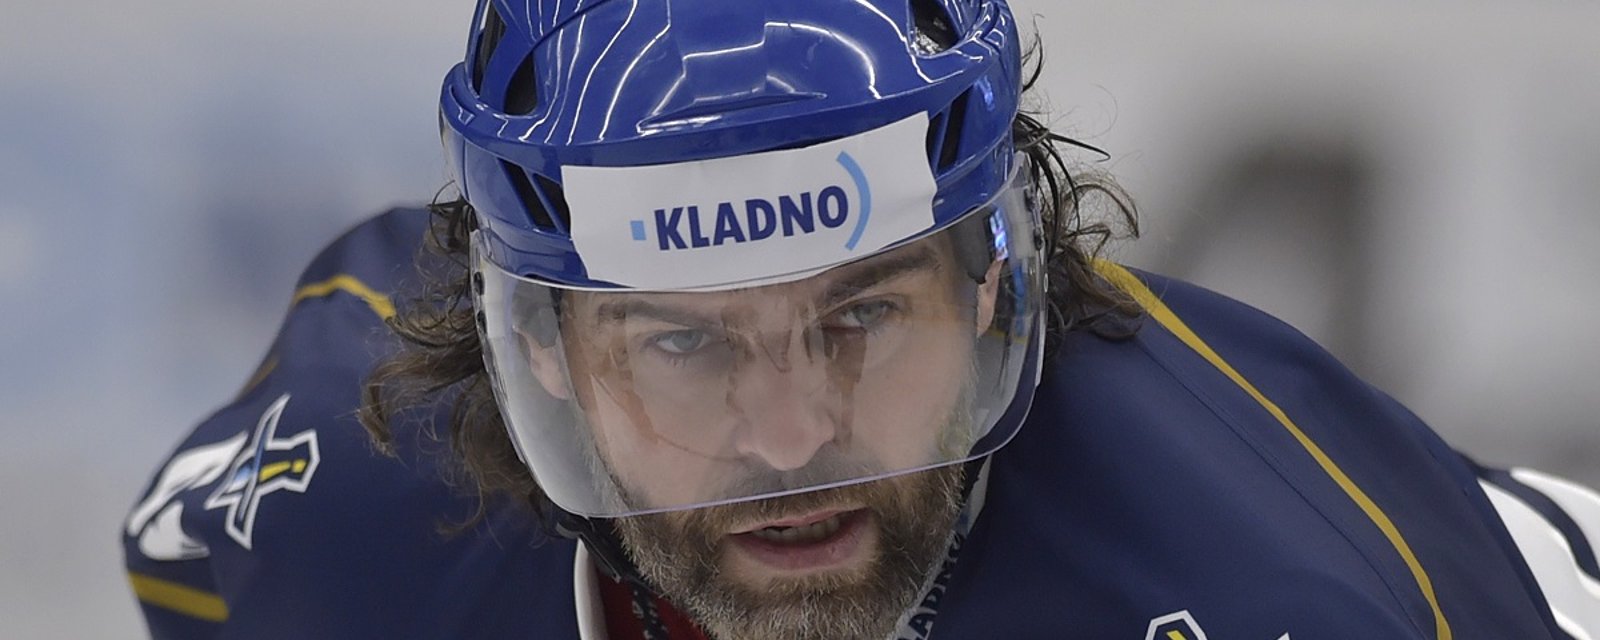 Jaromir Jagr begins the next crazy chapter of his amazing hockey career!